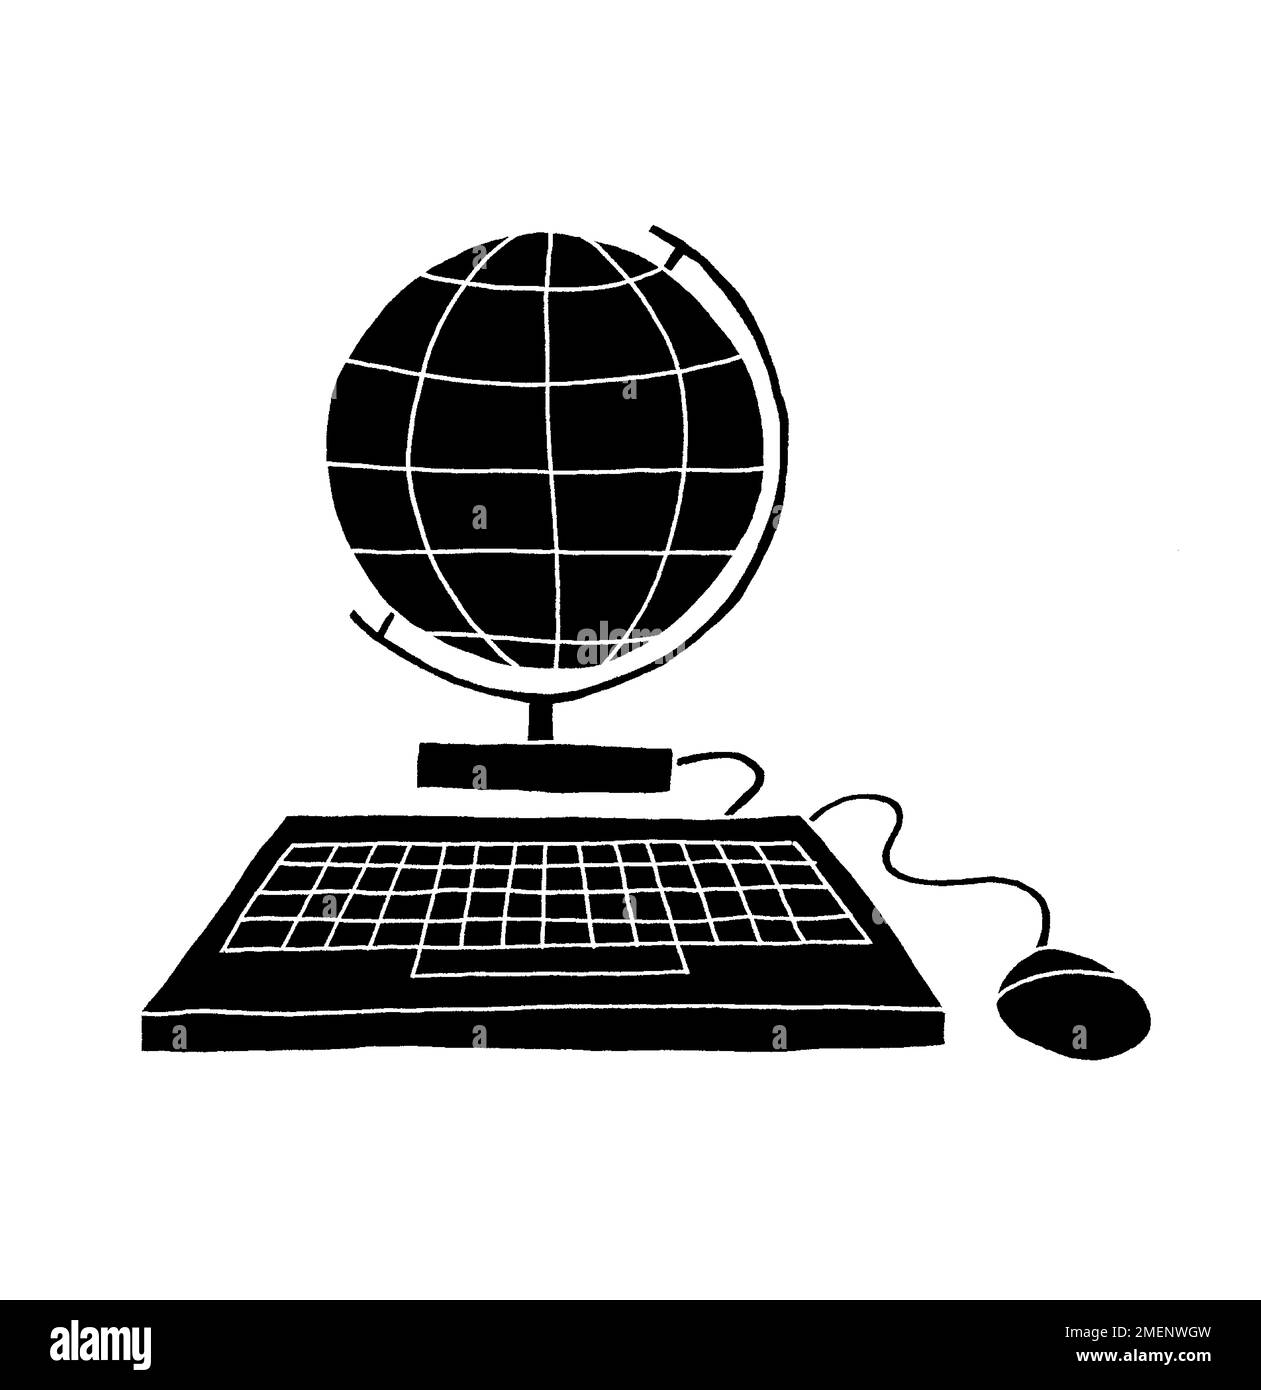 Black and white illustration of a globe as a computer monitor Stock Photo